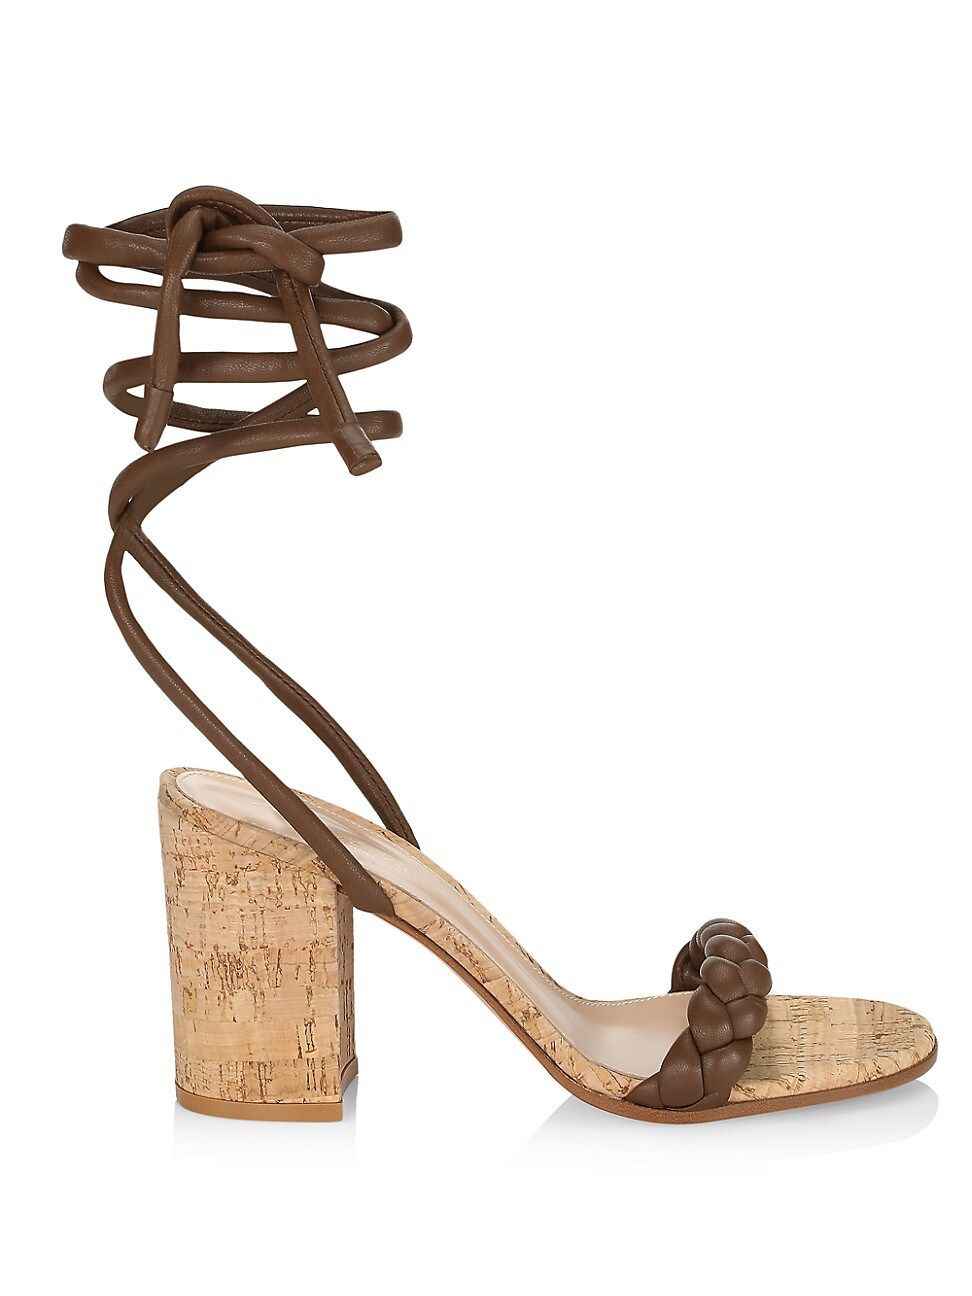 Gianvito Rossi Women's Braided Ankle-Wrap Leather Cork Heel Sandals - Texas Naturale - Size 9 | Saks Fifth Avenue